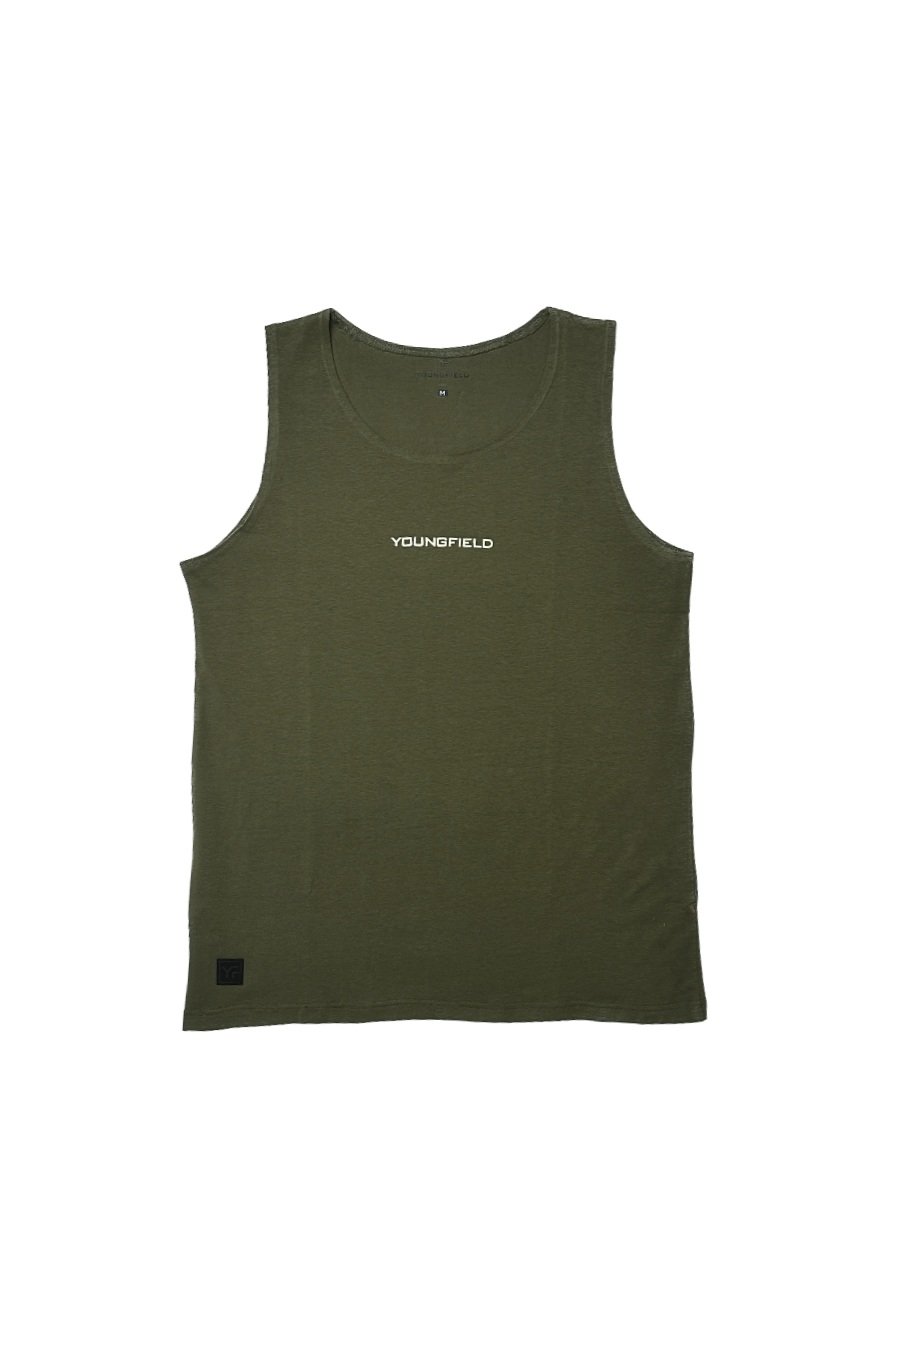 Athletic Works Tank Tops for Men - Performance and Style for